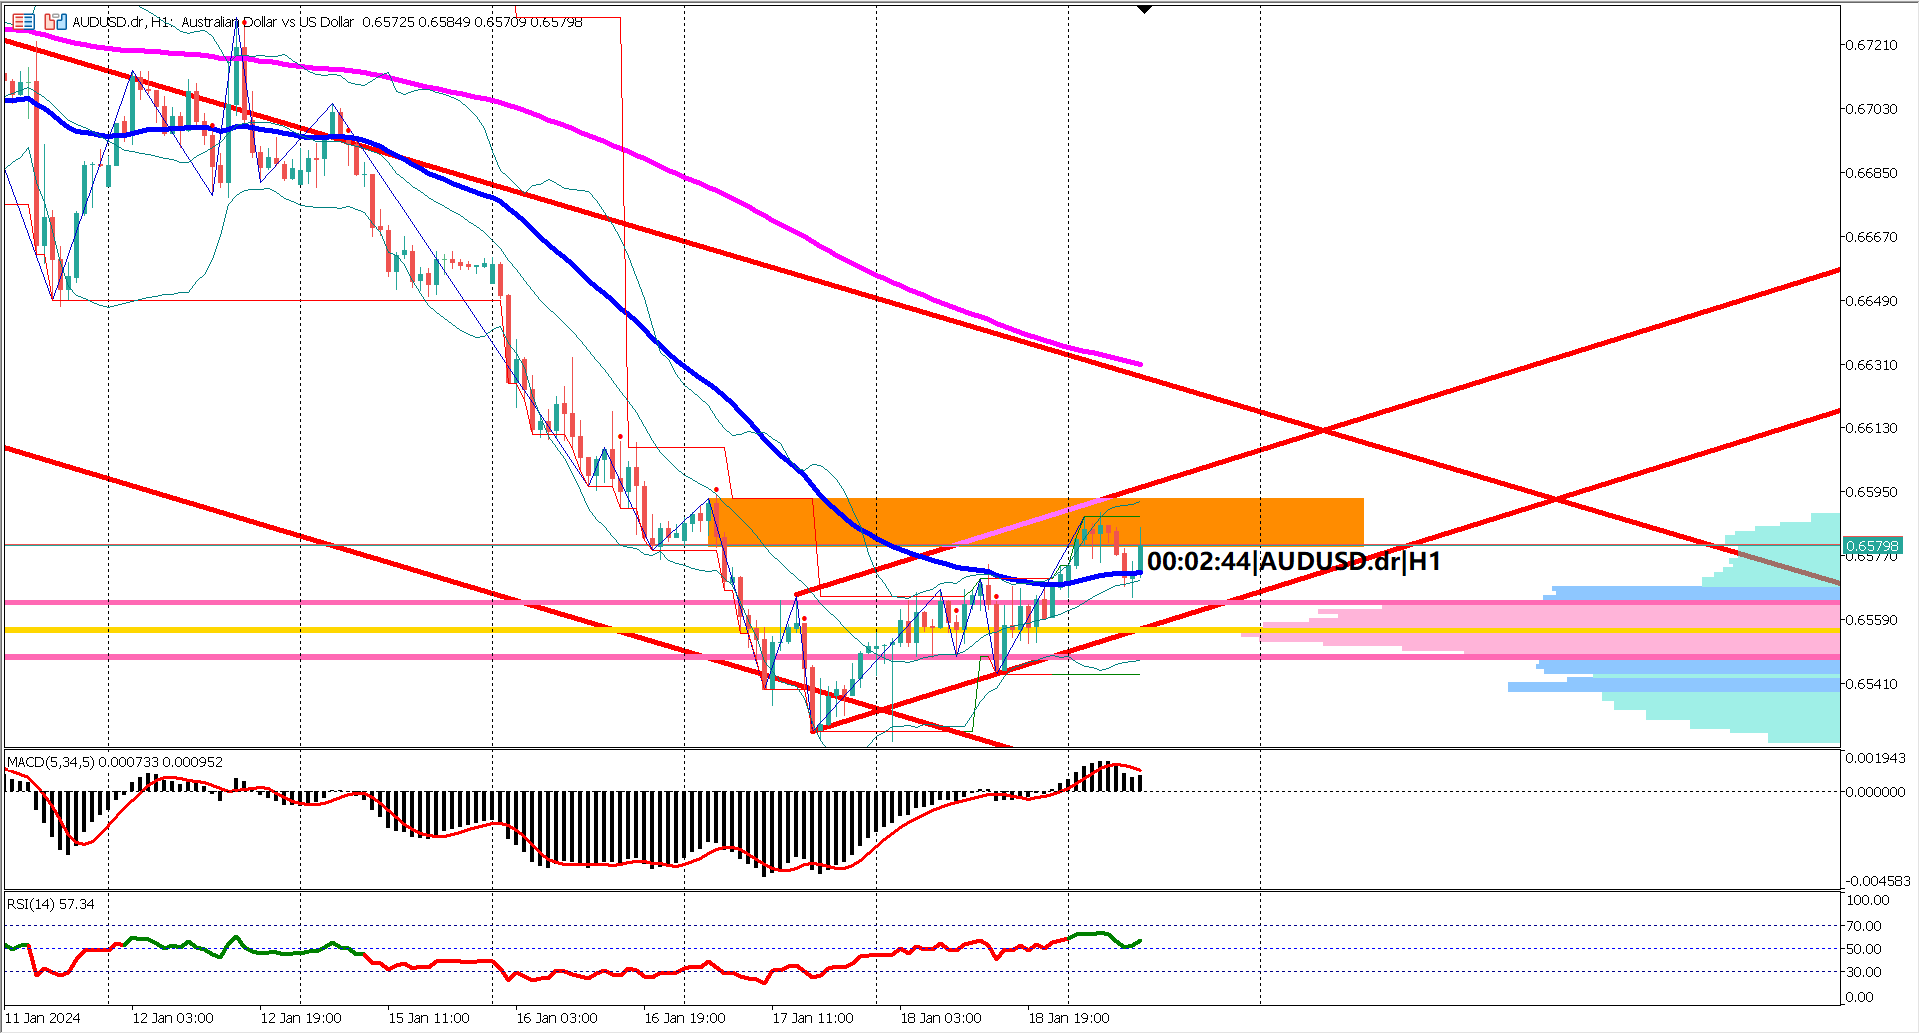 AUDUSD Breakout Watch: Key Resistance at 0.6600 Could Pave the Way for Bulls.